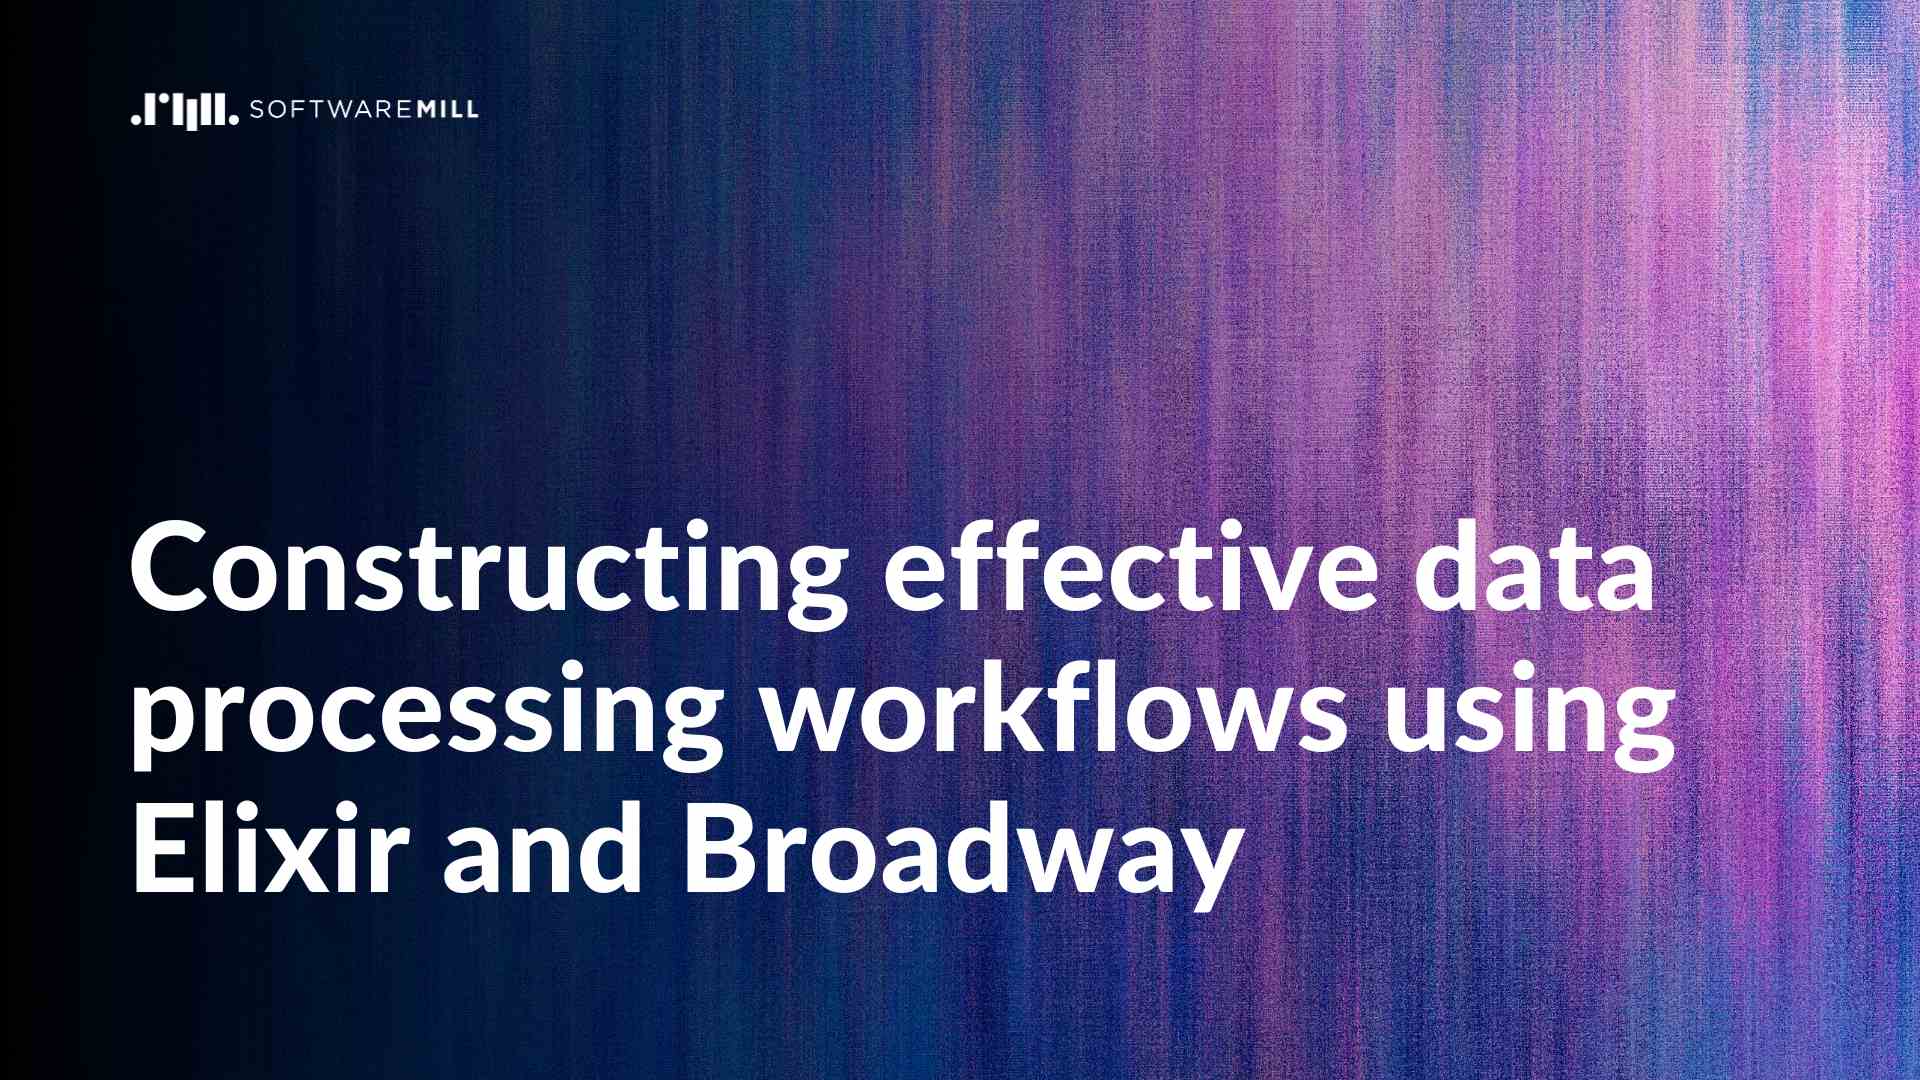 Constructing effective data processing workflows using Elixir and Broadway webp image